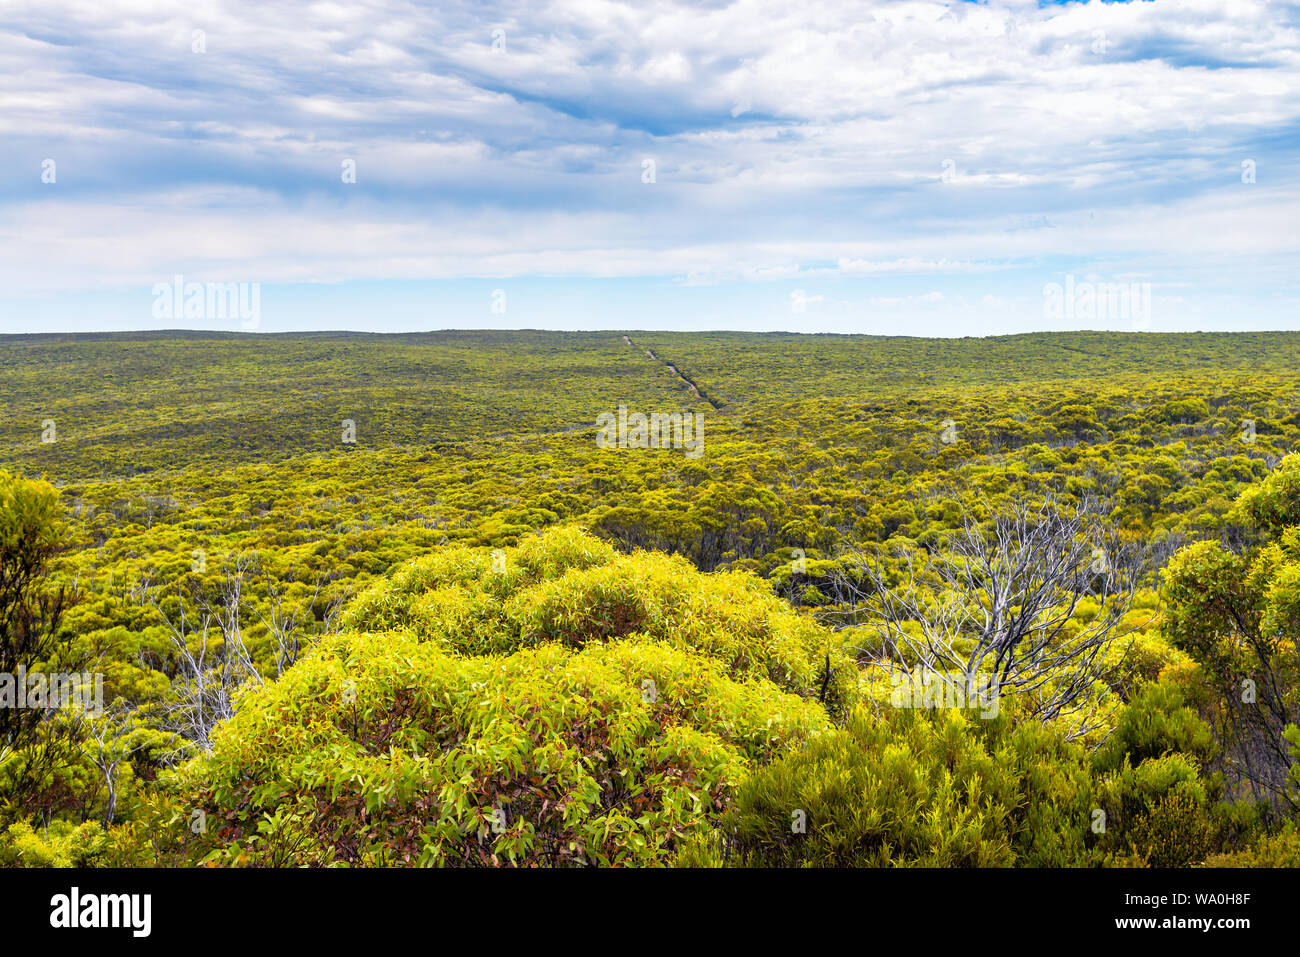 Endless bushland with eucalyptus trees viewed from Bunker Hill Lookout, Kangaroo Islan, South Australia Stock Photo